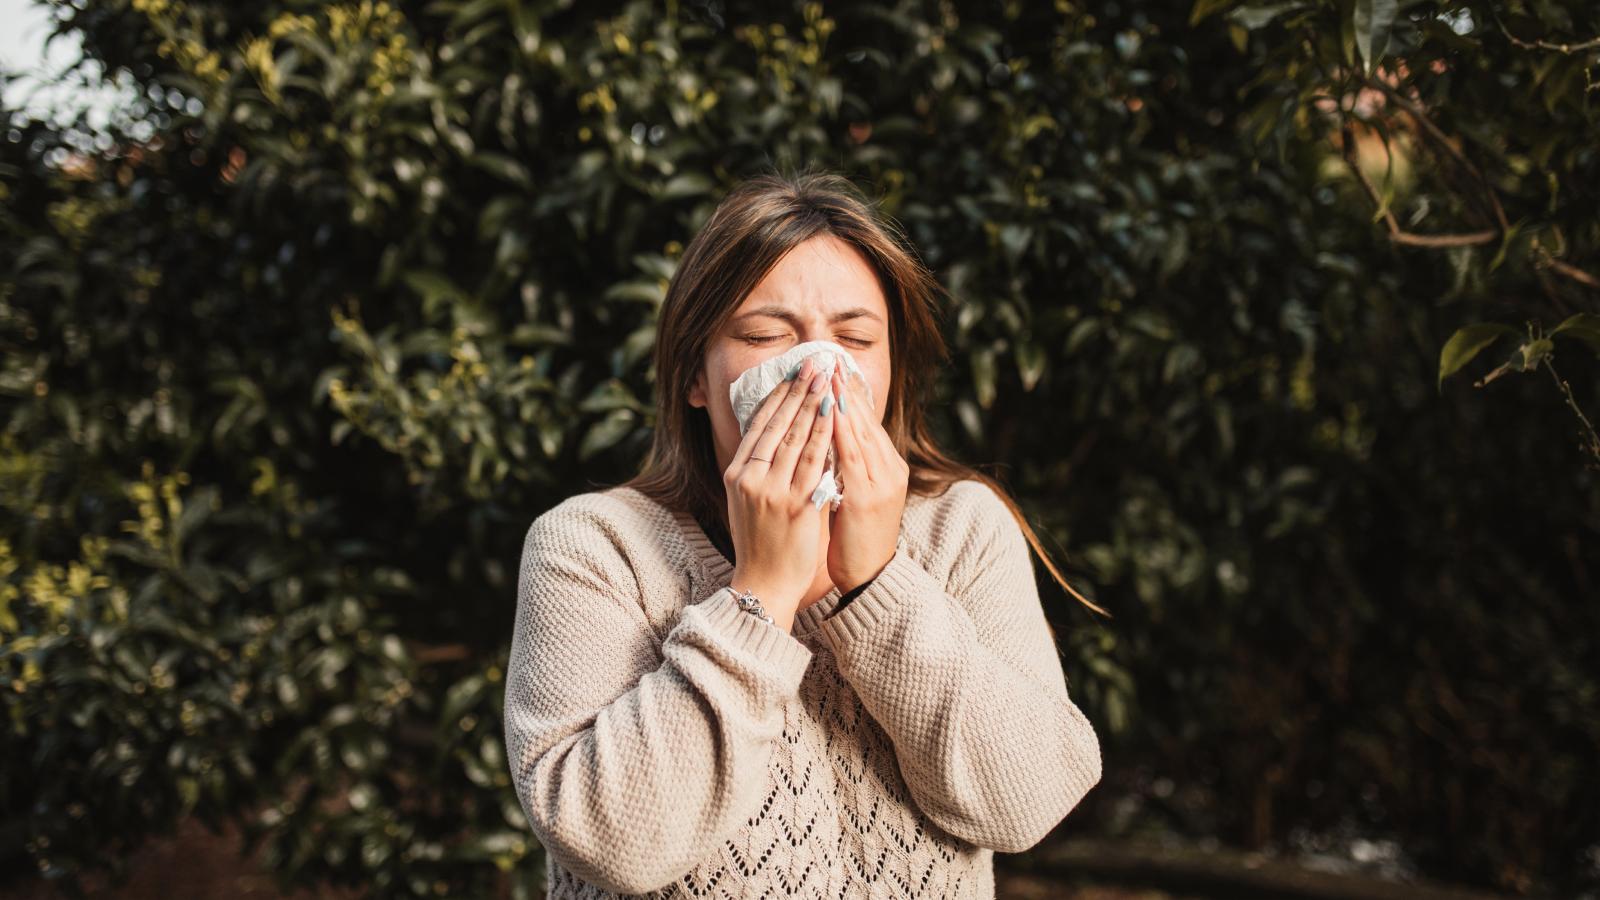 Woman in a tan sweater stands outside sneezing into a tissue.